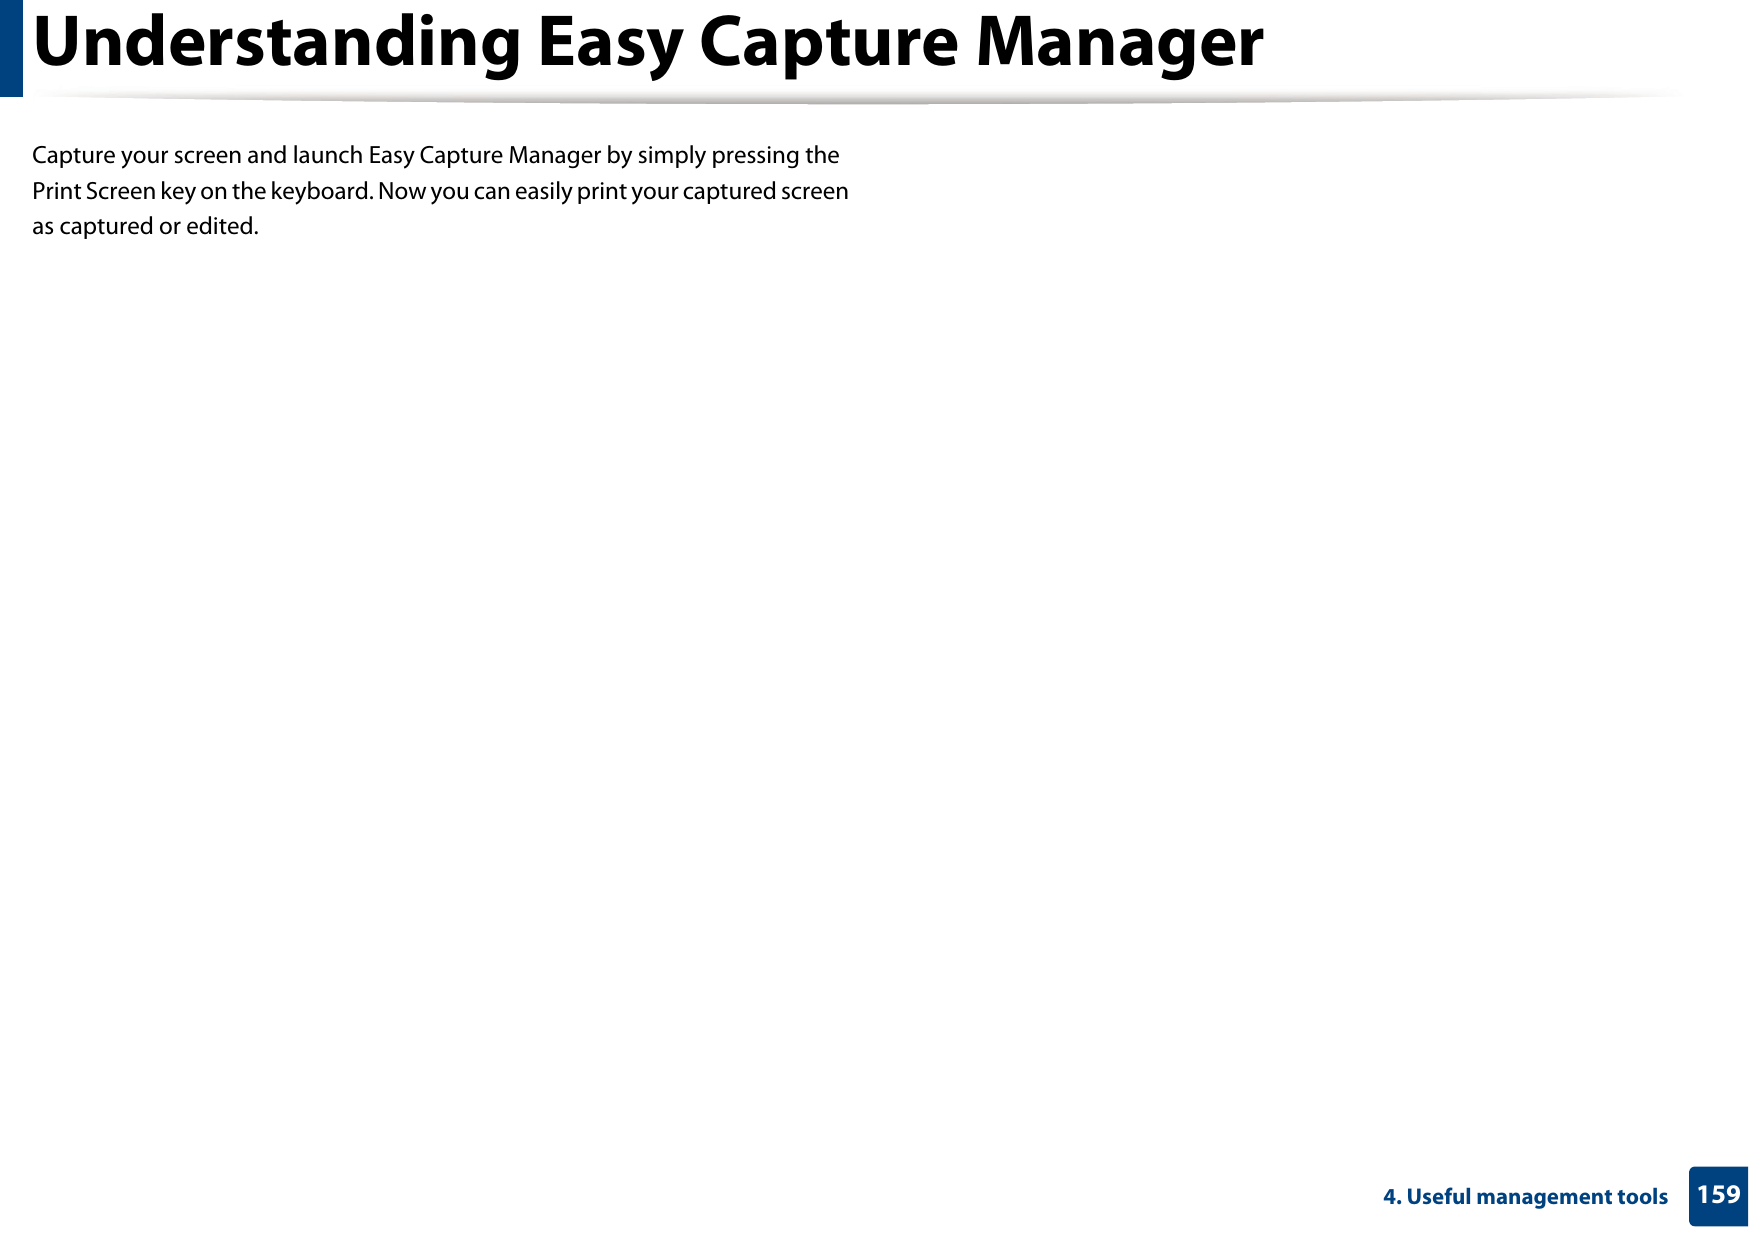 1594. Useful management toolsUnderstanding Easy Capture ManagerCapture your screen and launch Easy Capture Manager by simply pressing the Print Screen key on the keyboard. Now you can easily print your captured screen as captured or edited. 